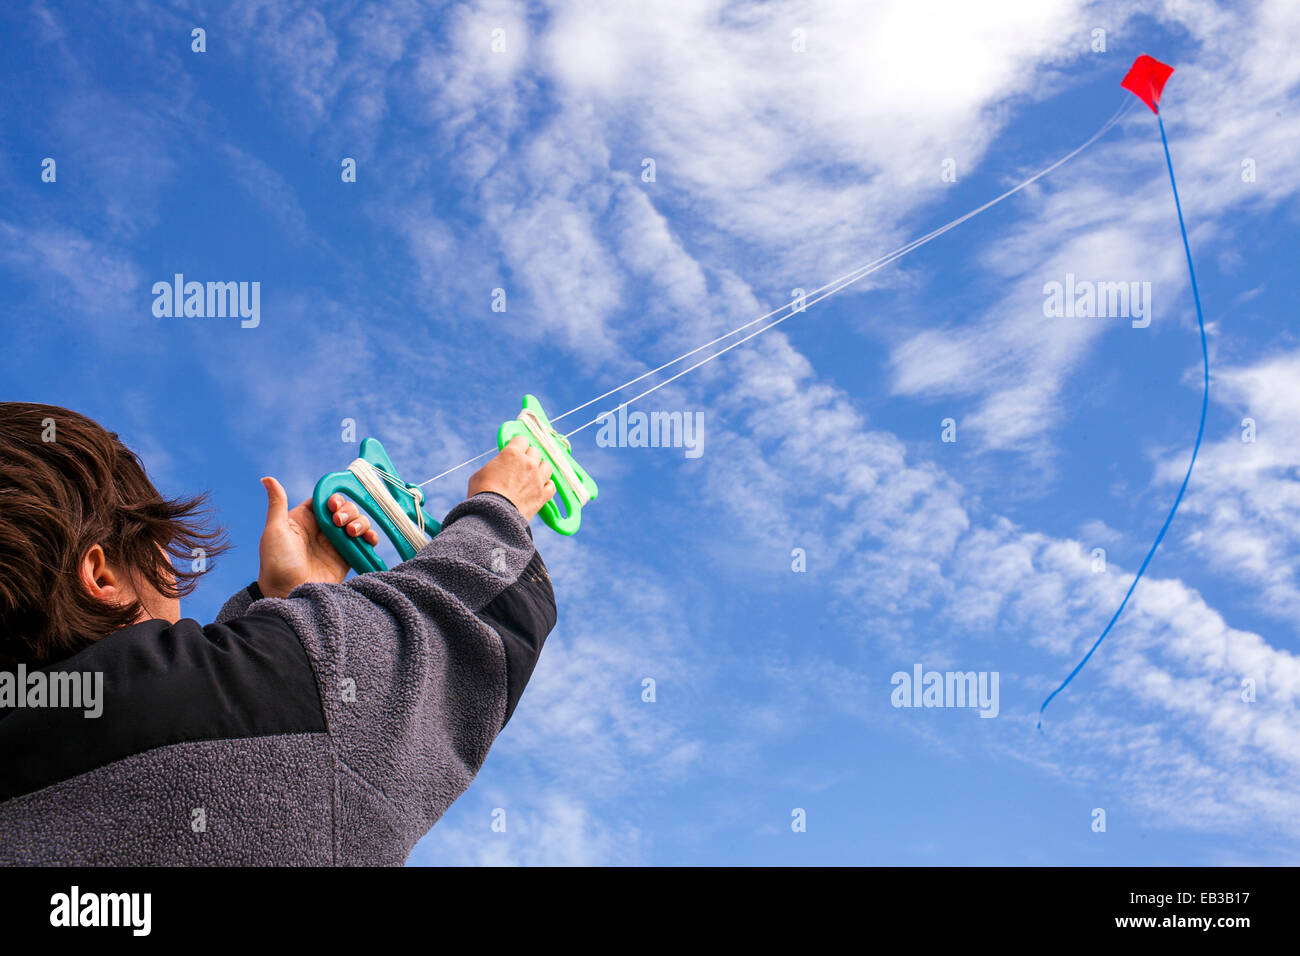 Low angle view of Caucasian man flying kite in blue sky Stock Photo